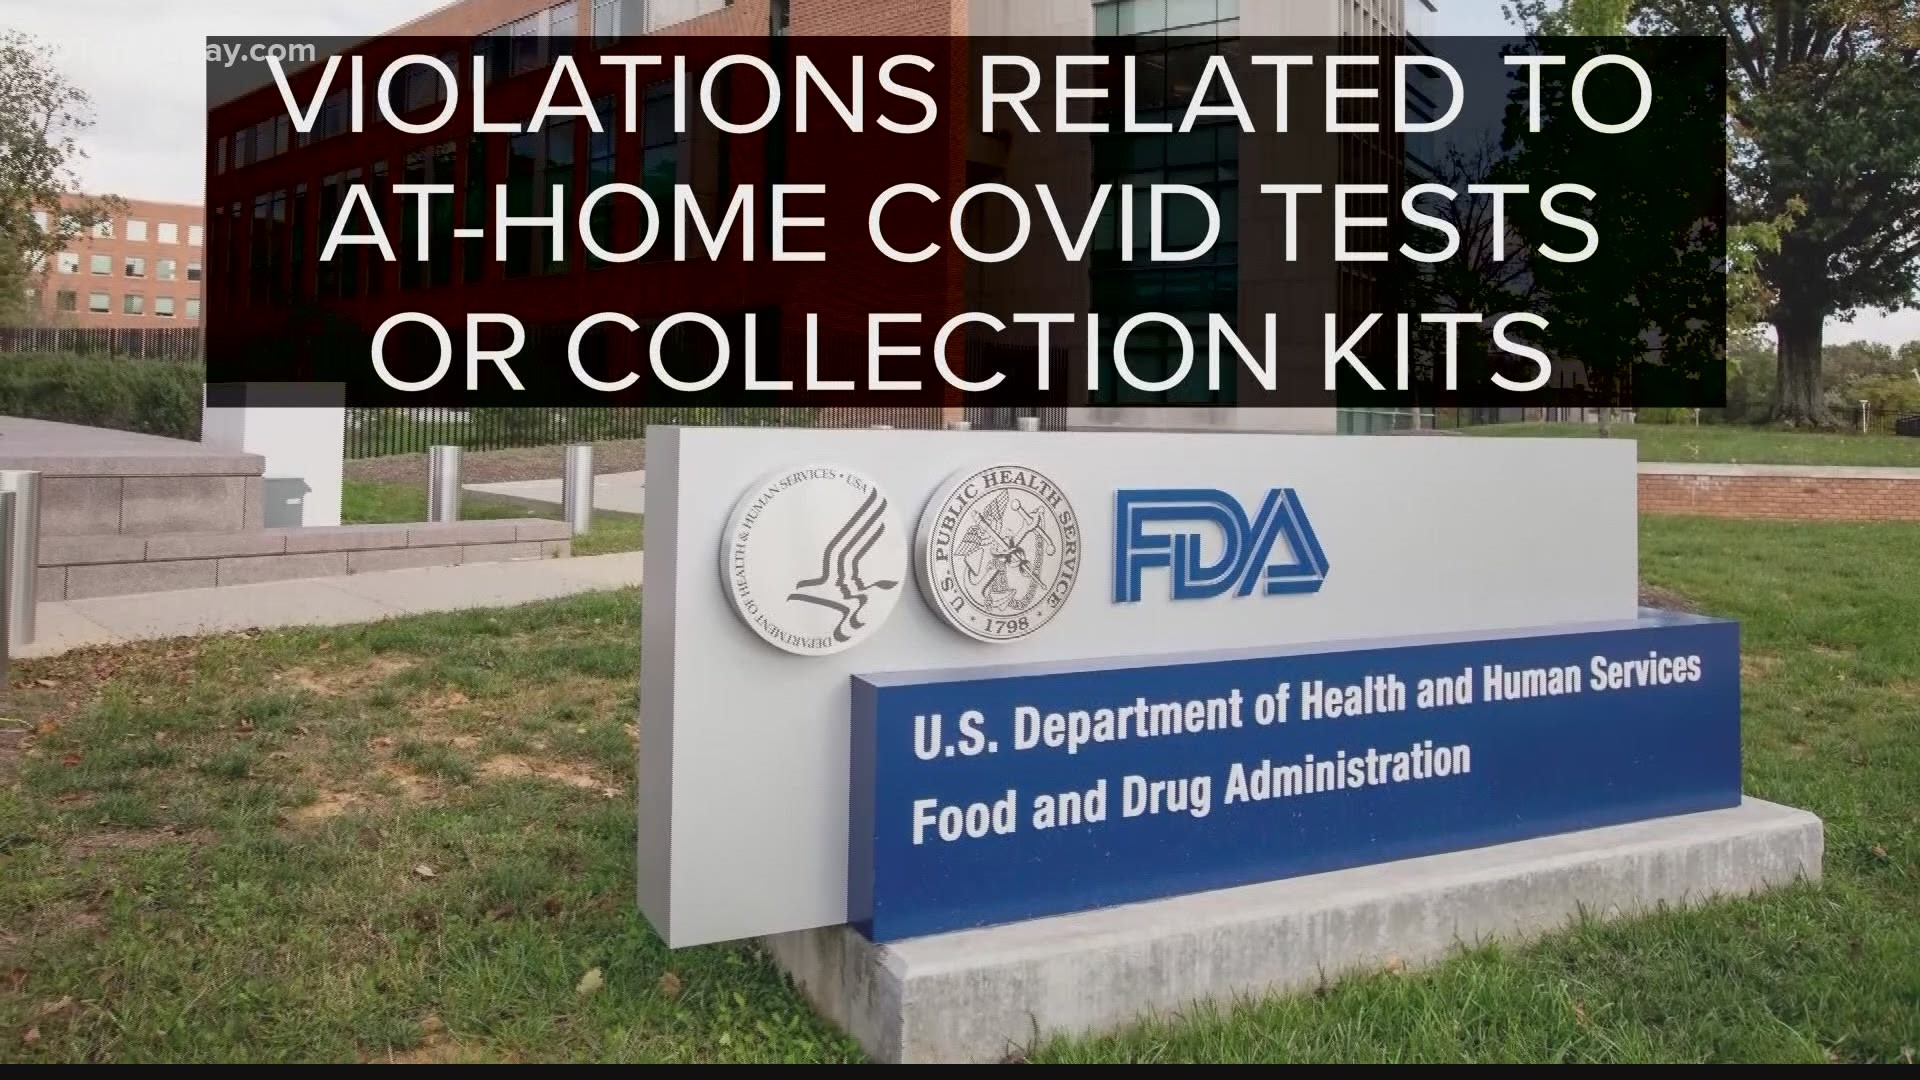 The government has busted dozens of businesses trying to sell unapproved coronavirus test kits for at-home use, including two in Tampa Bay.